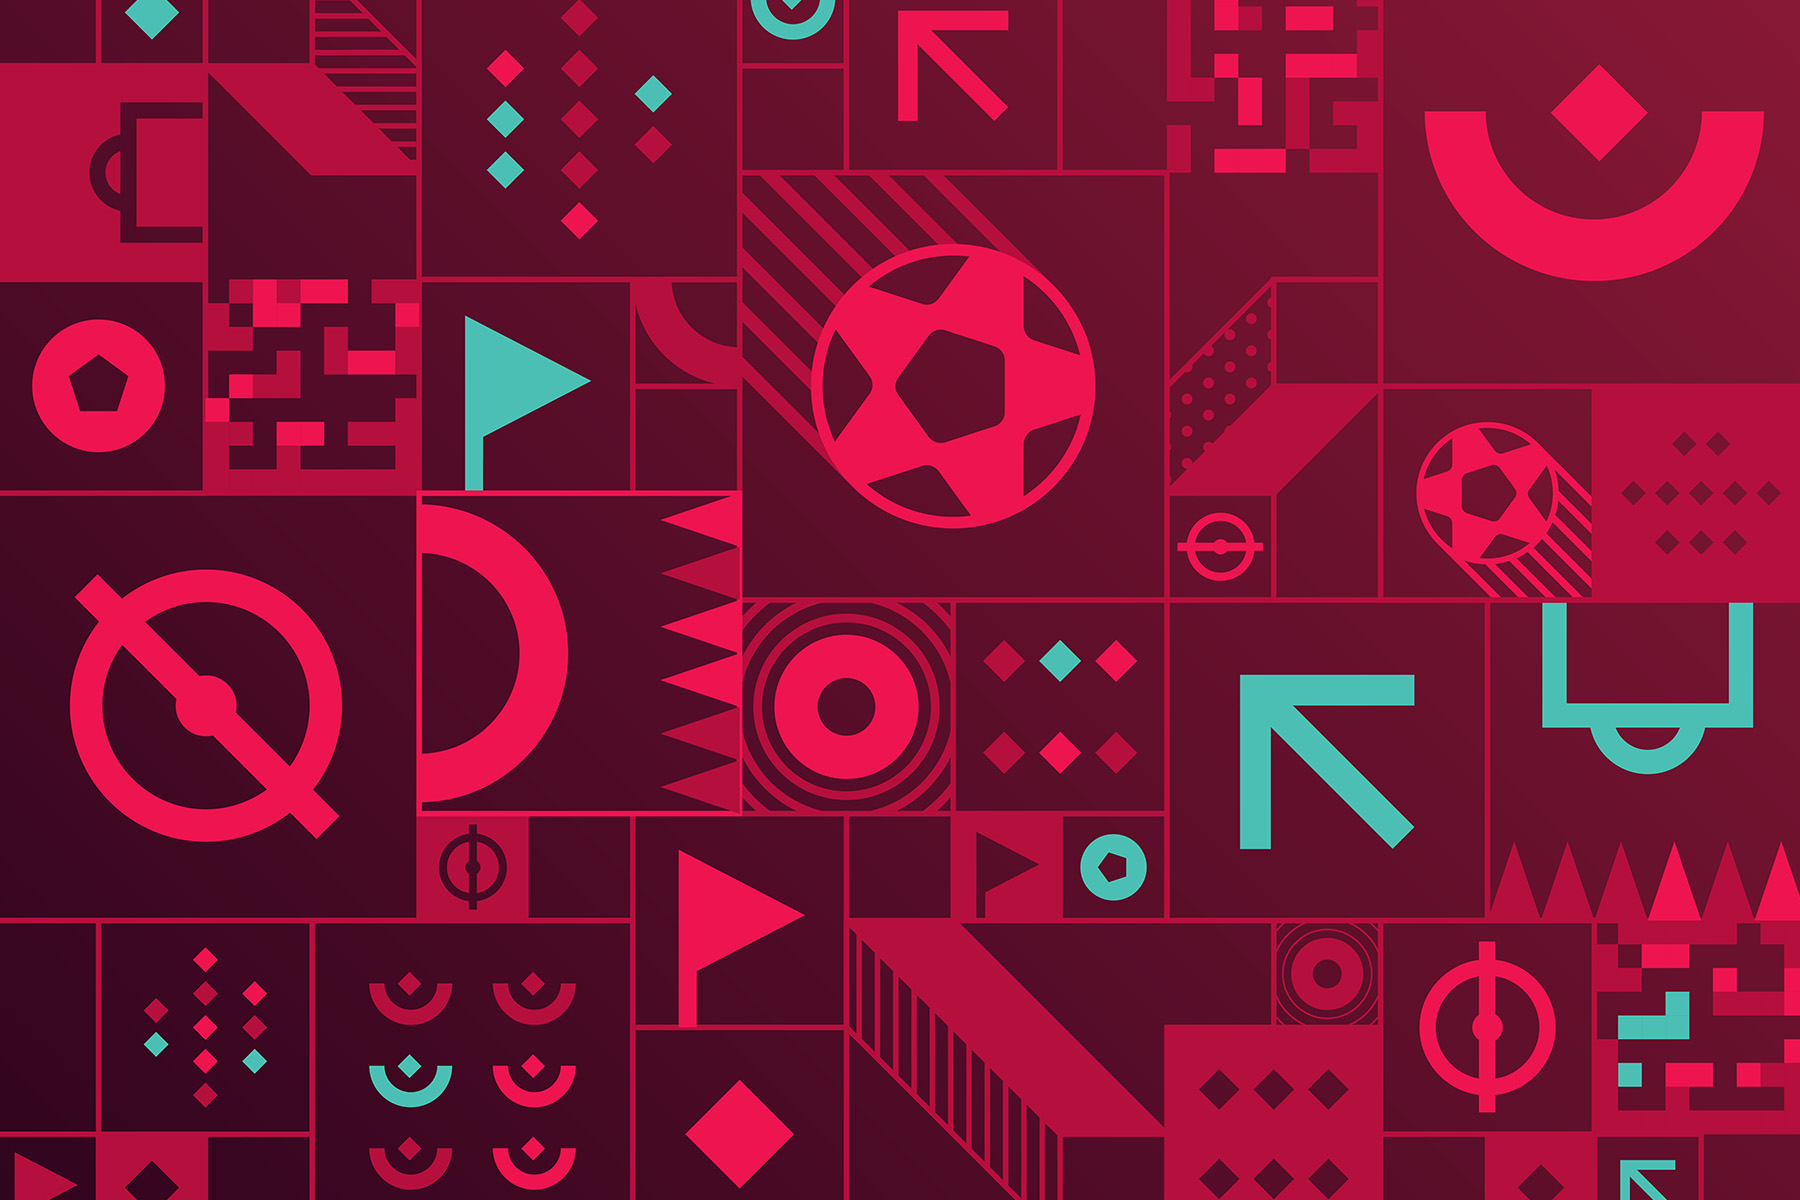 Red and turquoise graphic with footballs and icons